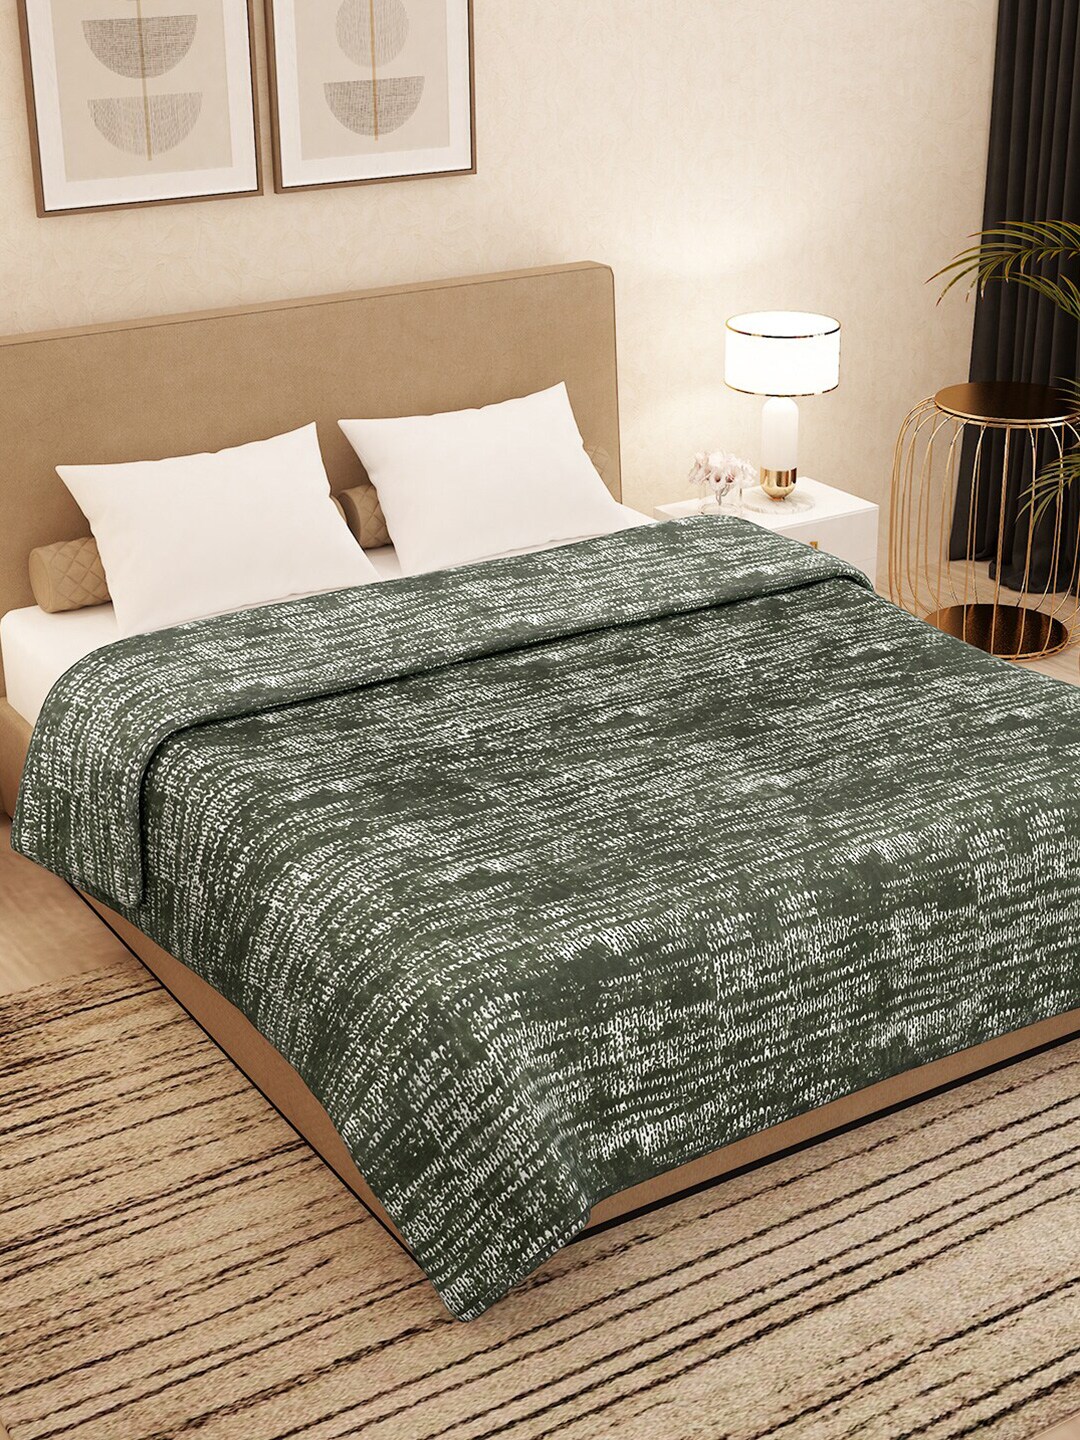 Story@home Olive Green & White Ethnic Motifs Heavy Winter 500 GSM Double Bed Blanket Price in India